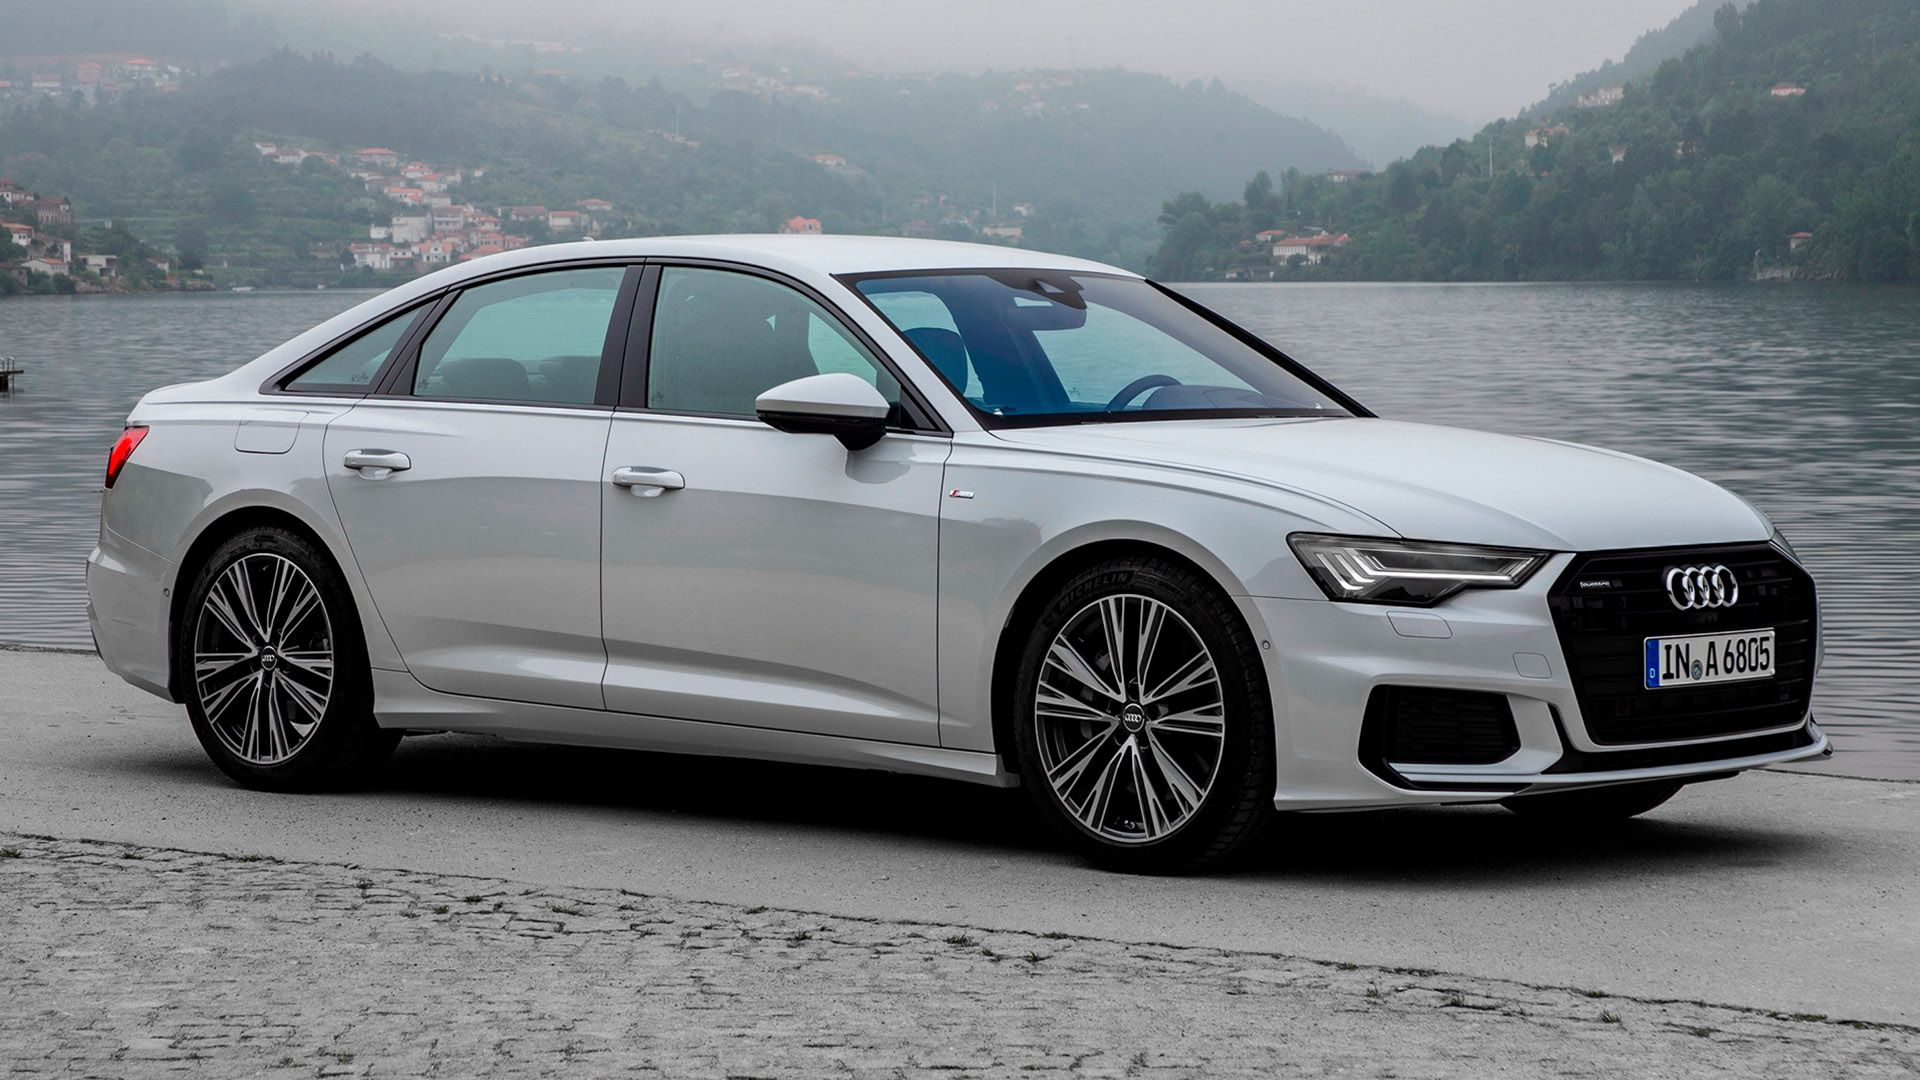 Light grey Audi A6 sedan standing in front of a lake, behind the lake is fog and mountains